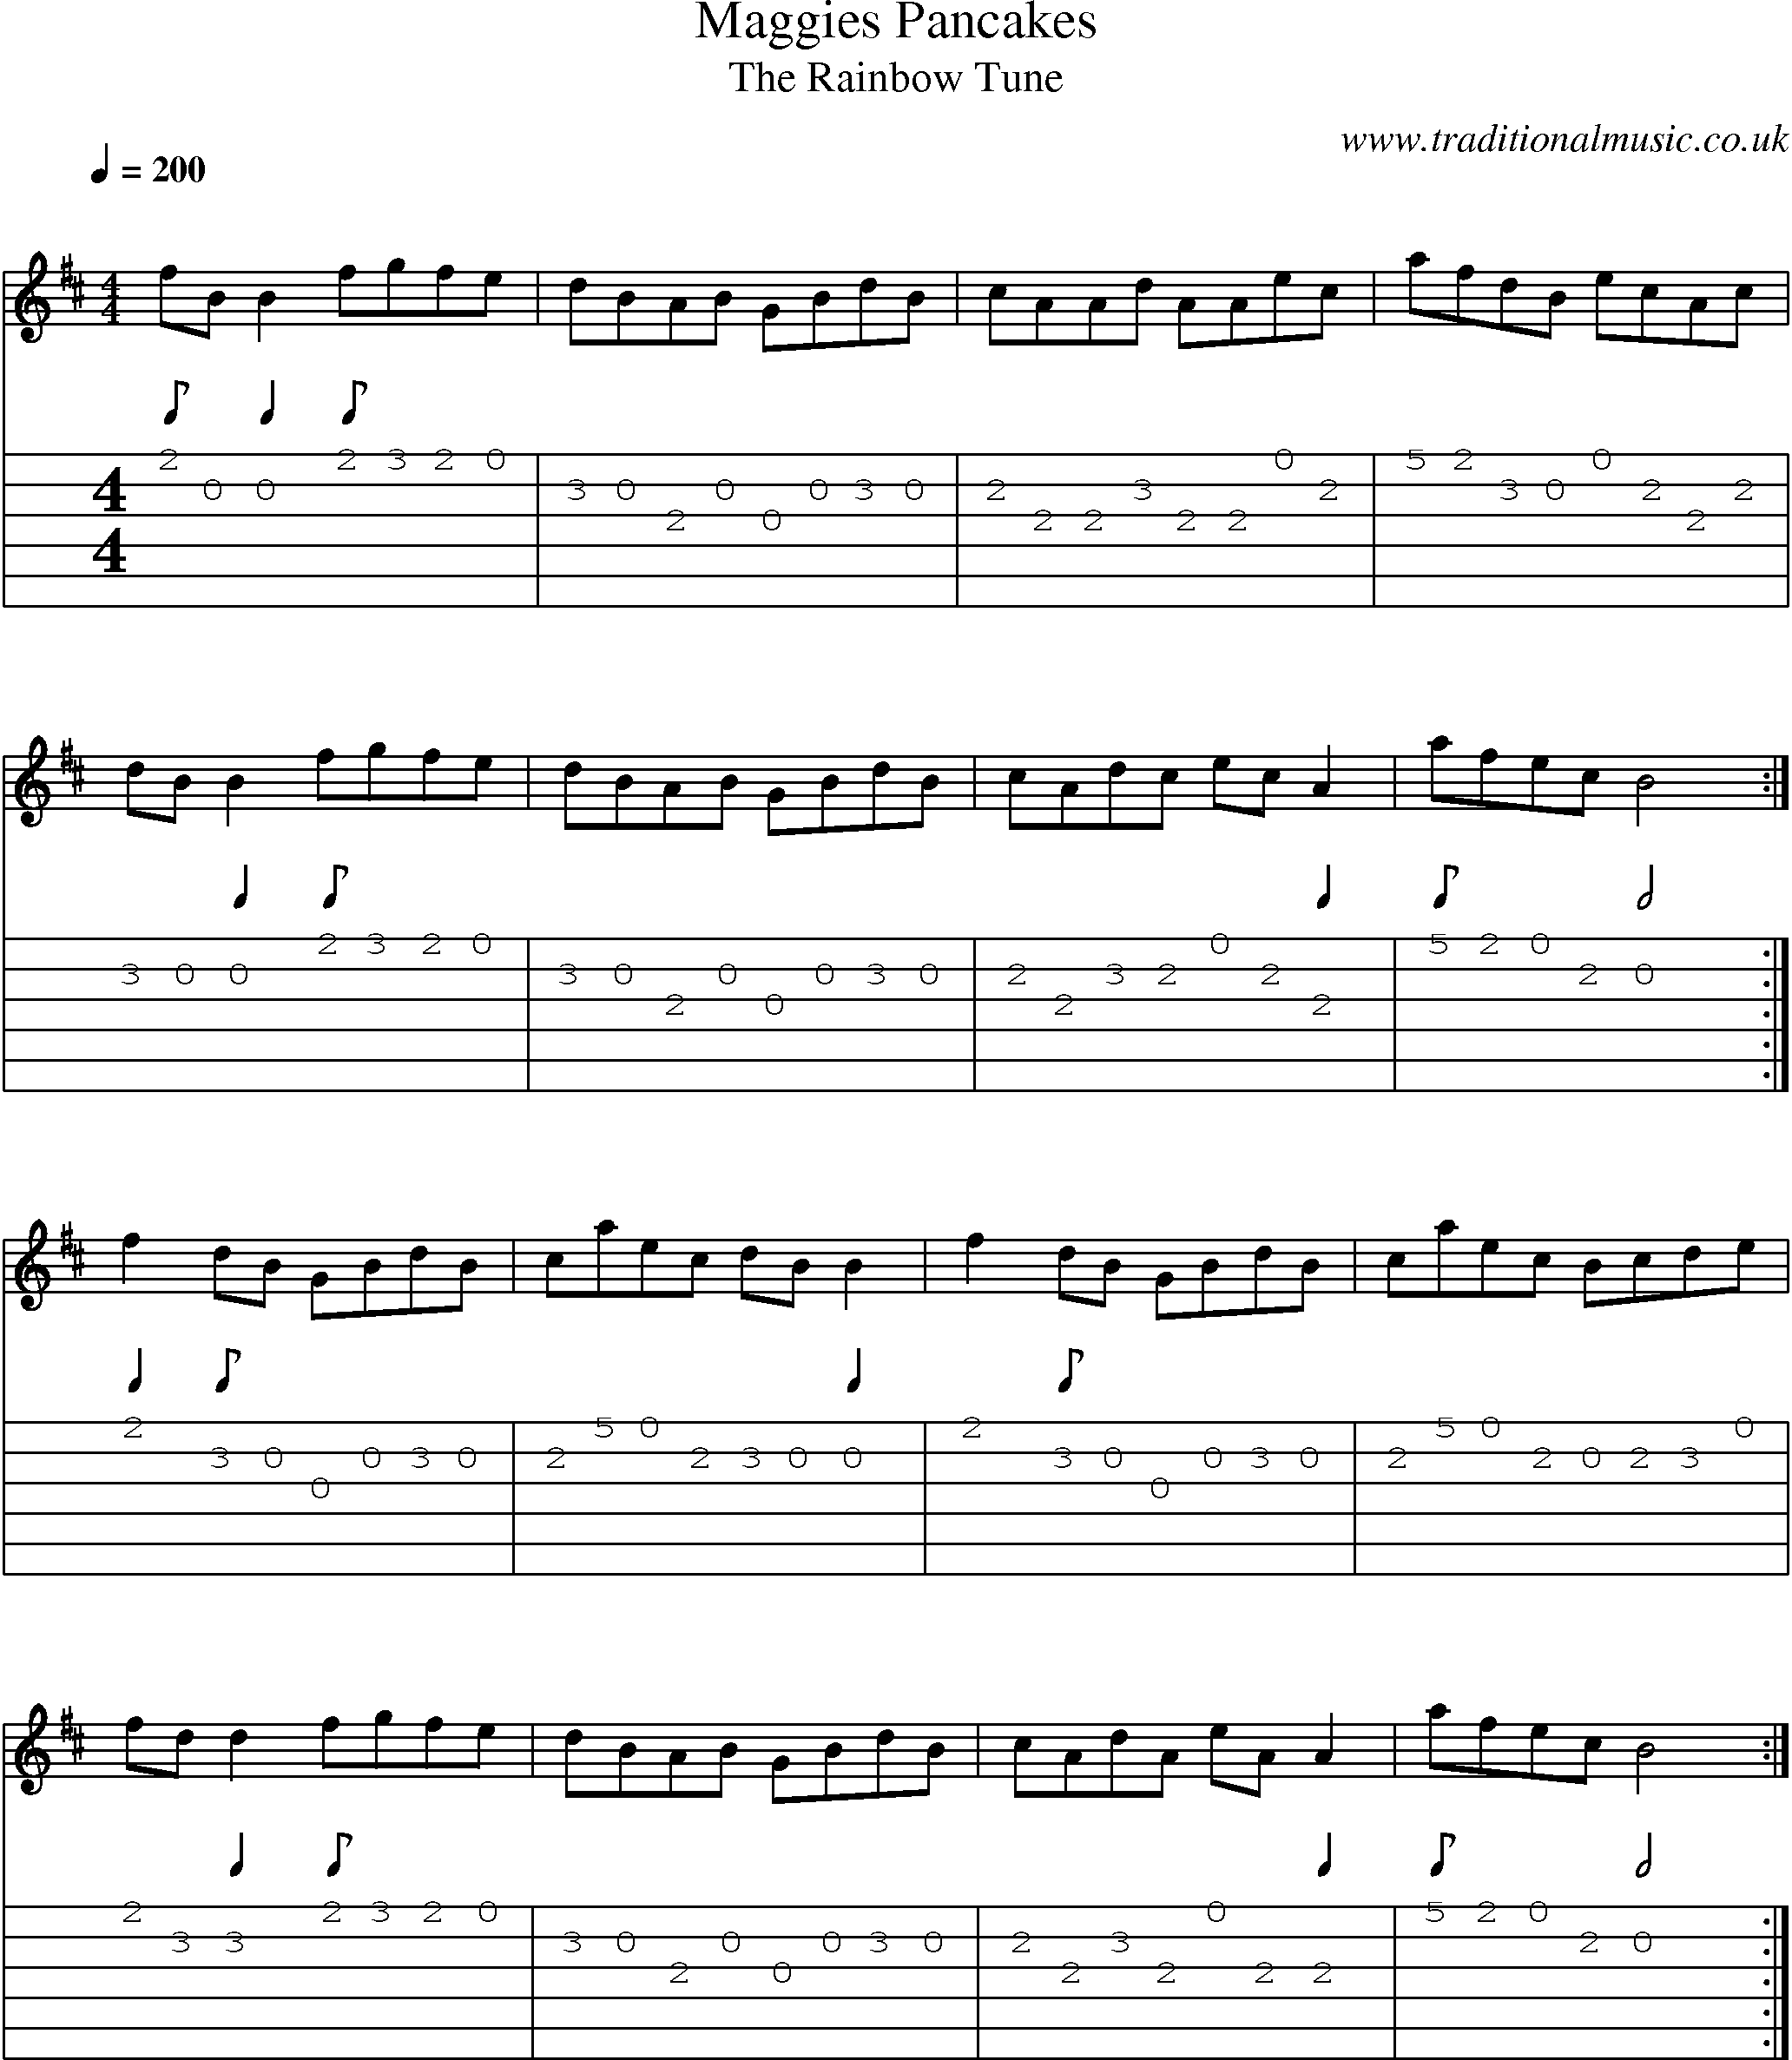 Music Score and Guitar Tabs for Maggies Pancakes